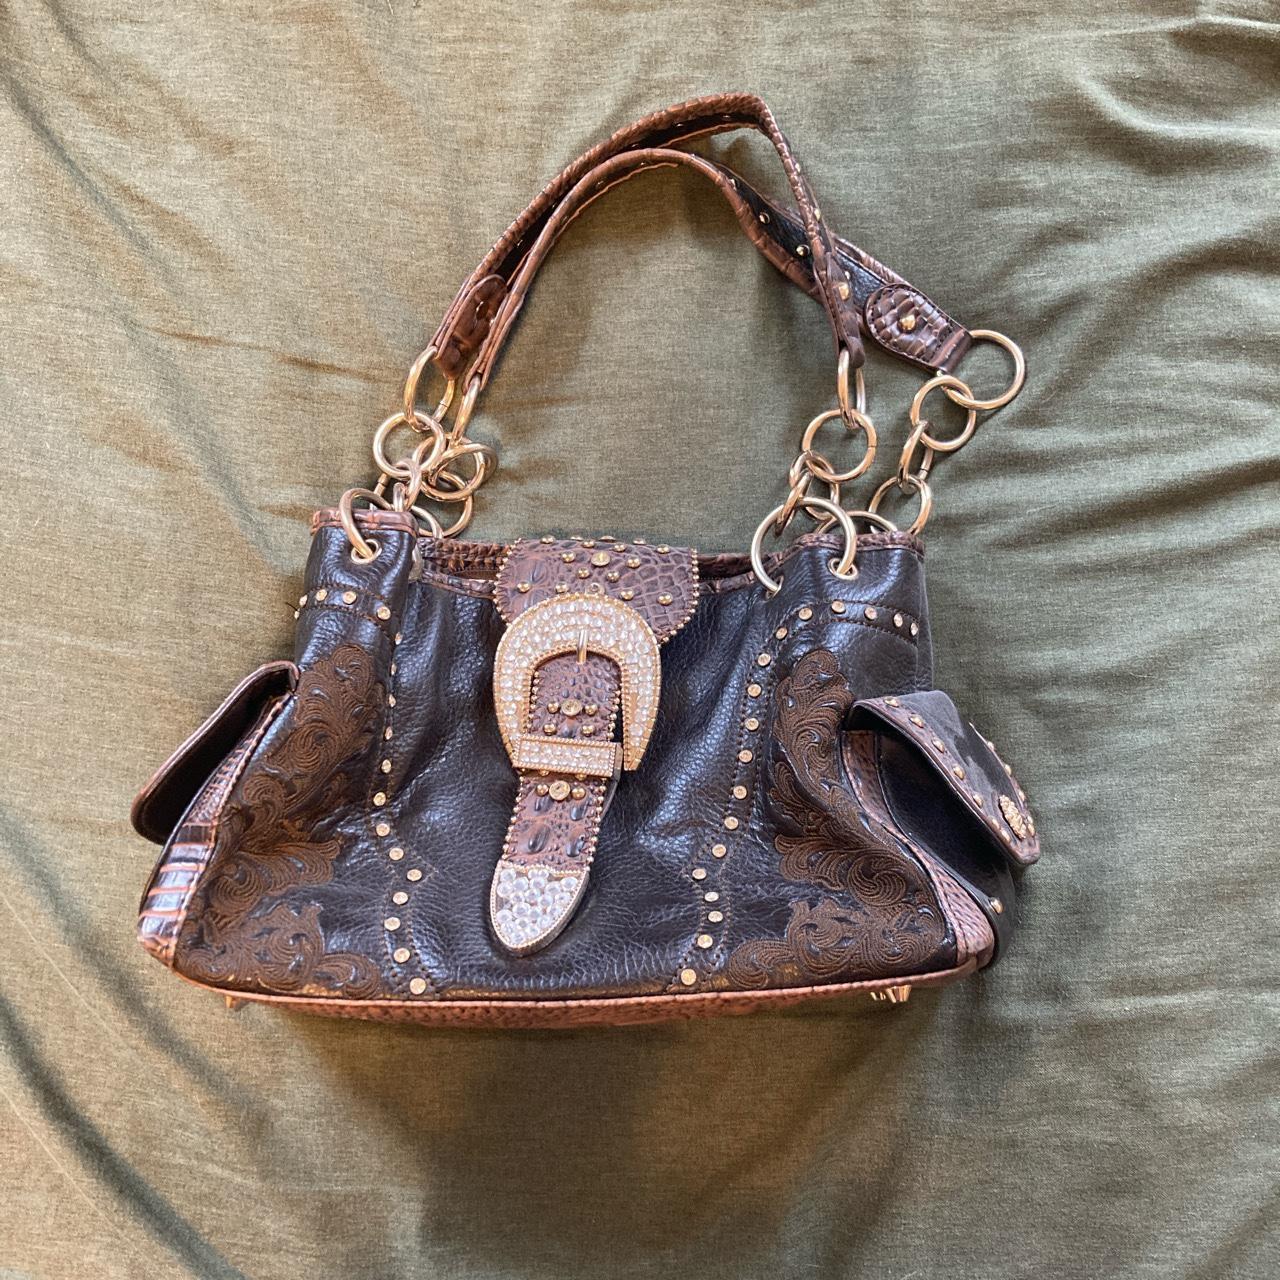 Brandy melville white faux leather buckle bag - Depop